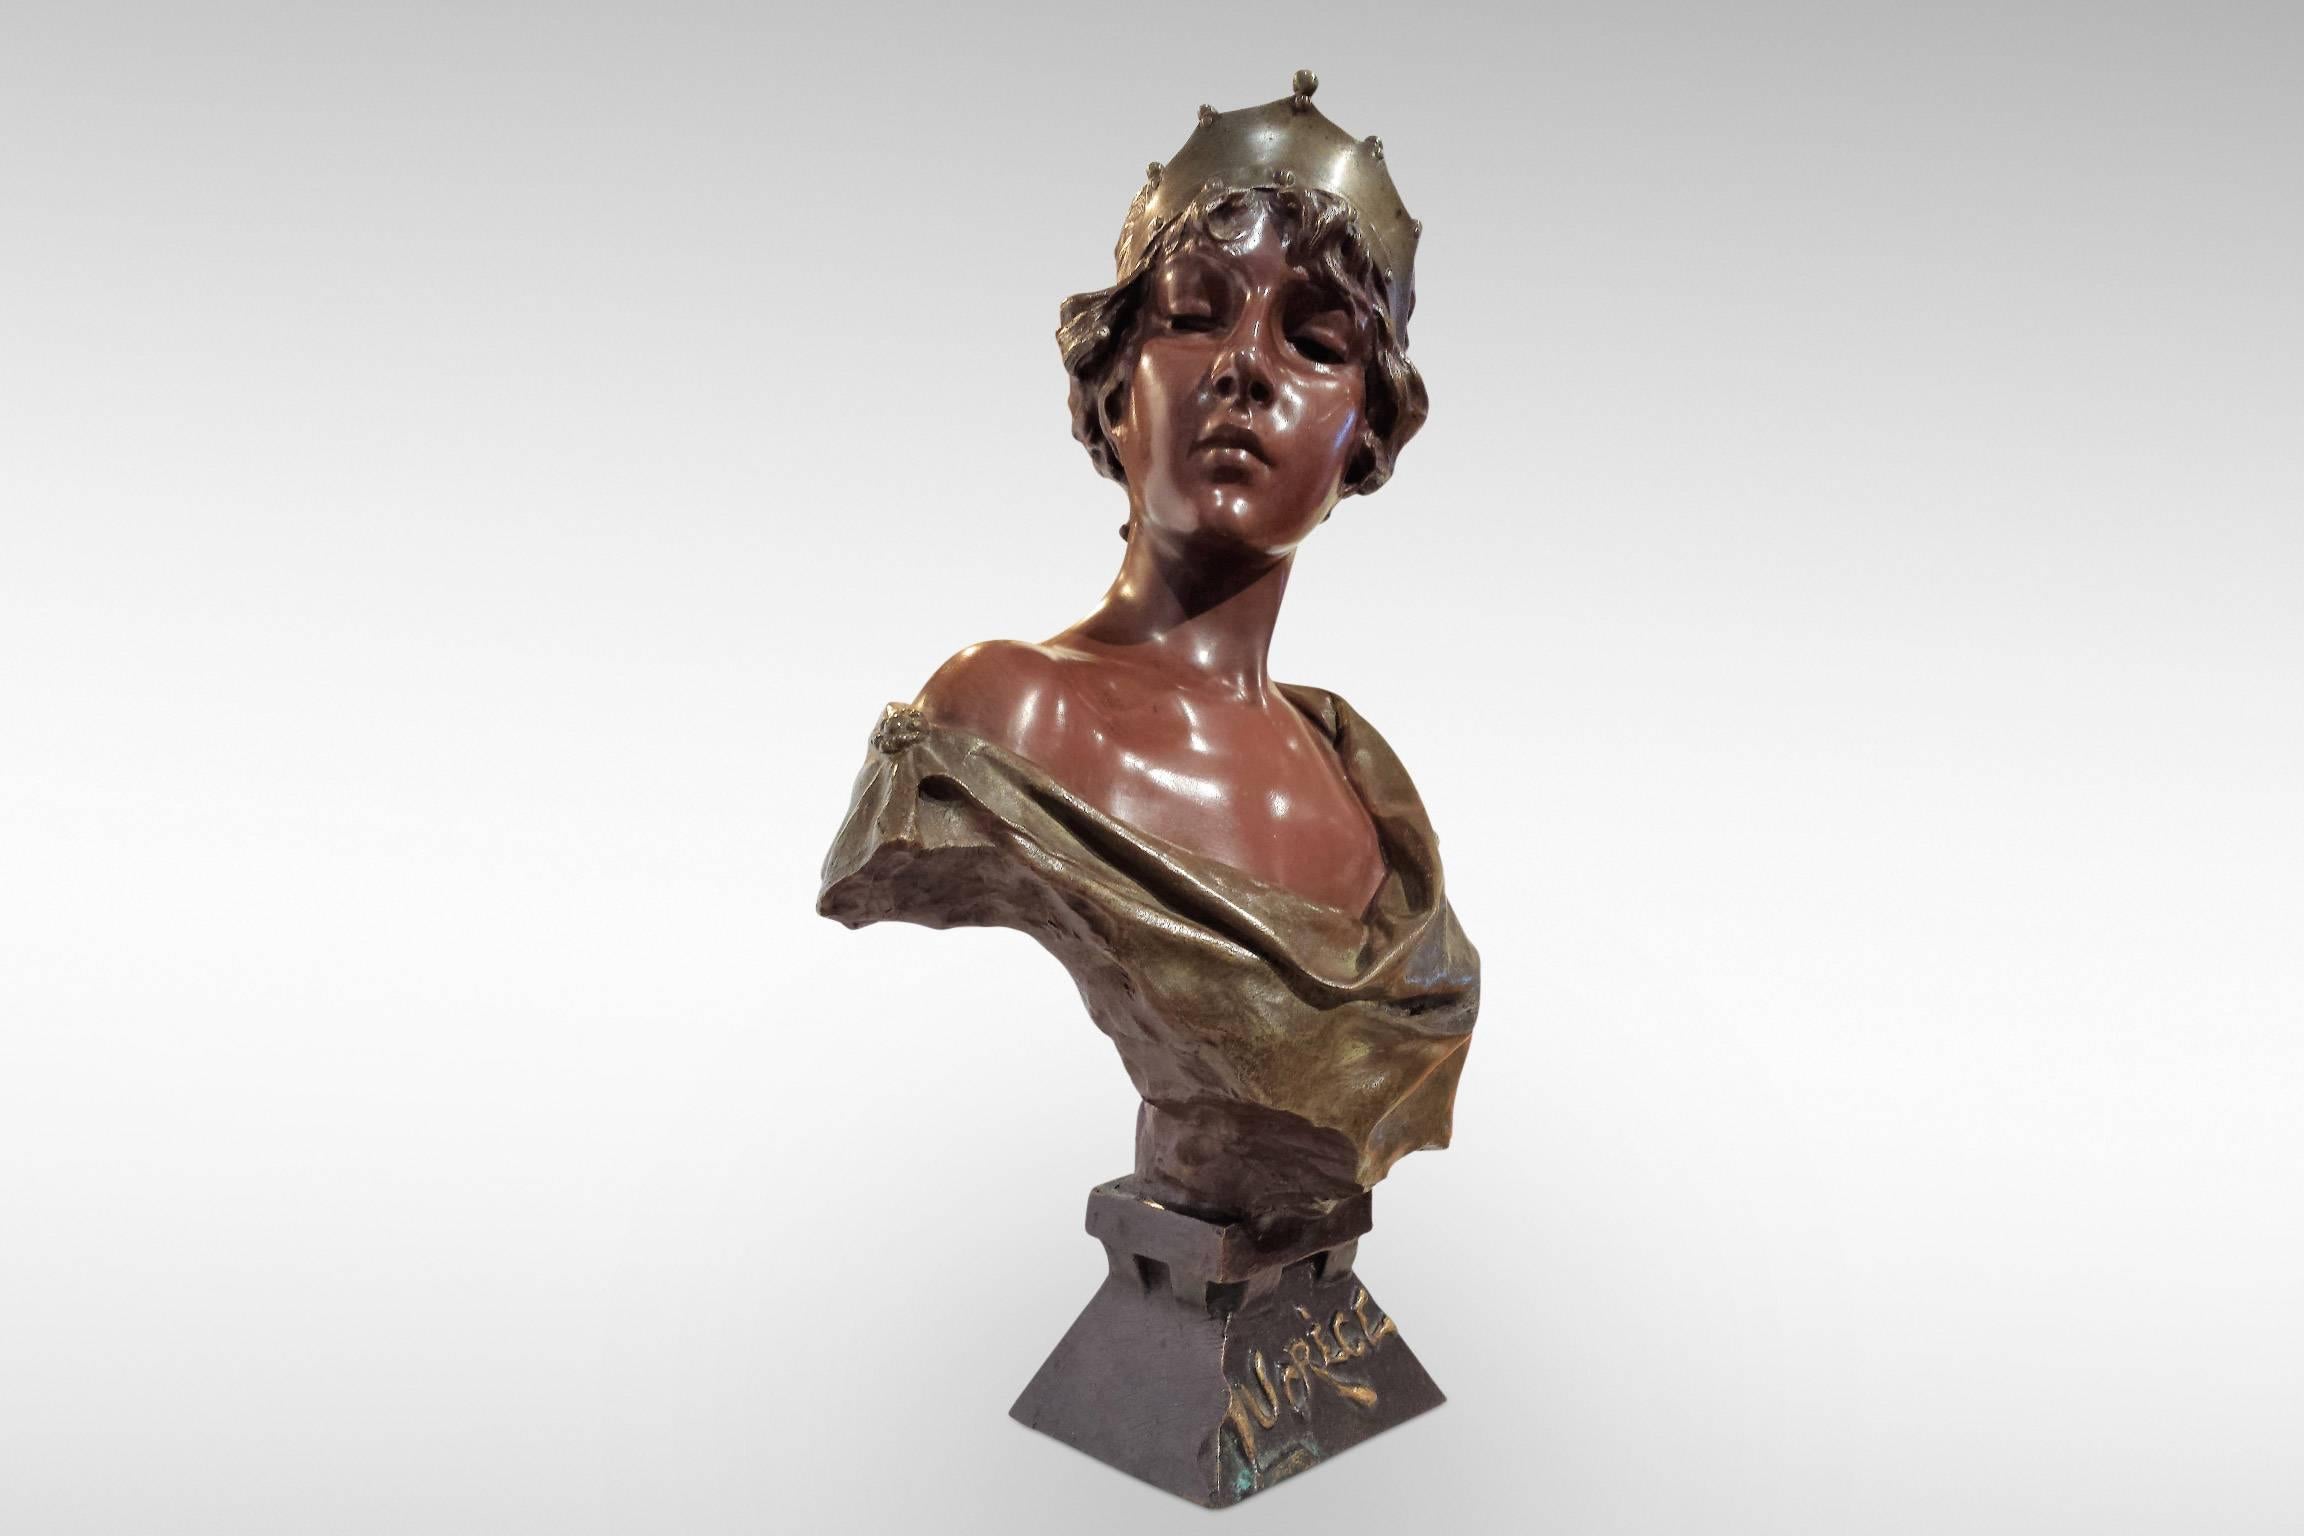 'Lucrece' is an Art Nouveau bronze sculpture by Emmanuel Villanis.
Signed 'E Villanis' to the arm, with title and foundary marks to the base.
circa 1890.